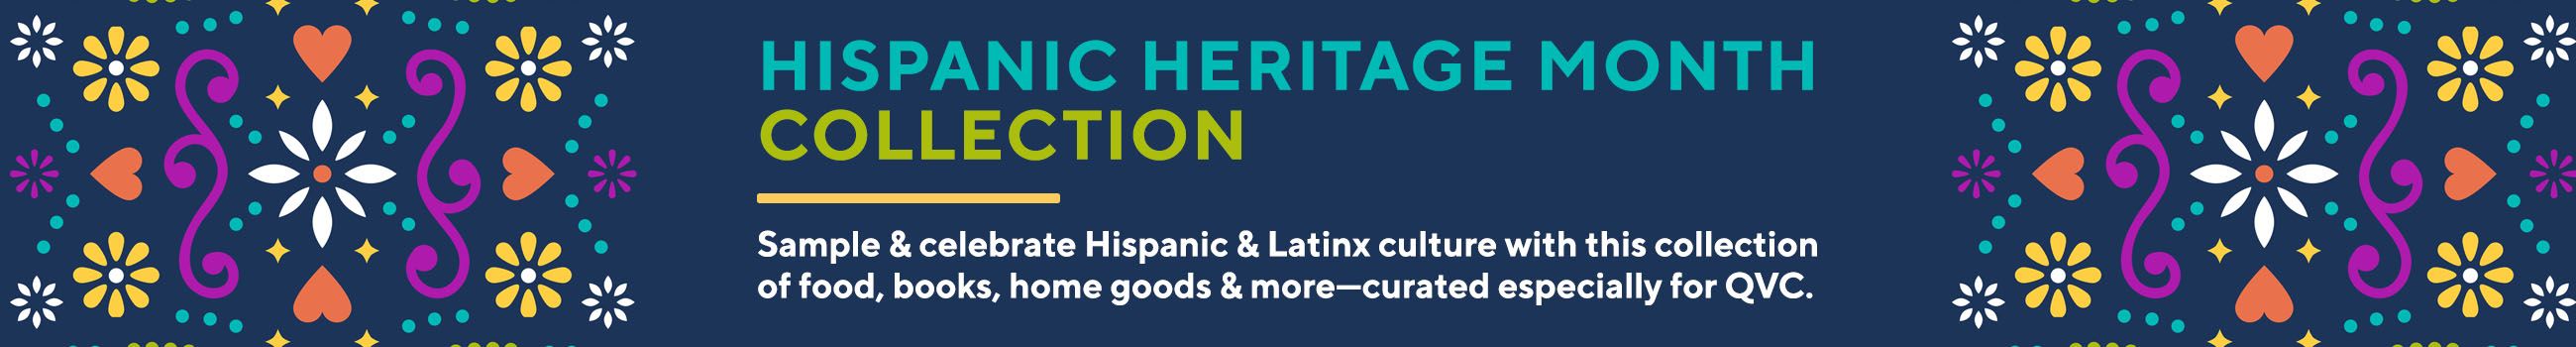 Hispanic Heritage Month Collection.  Sample & celebrate Hispanic & Latinx culture with this collection of food, books, home goods & more—curated especially for QVC.